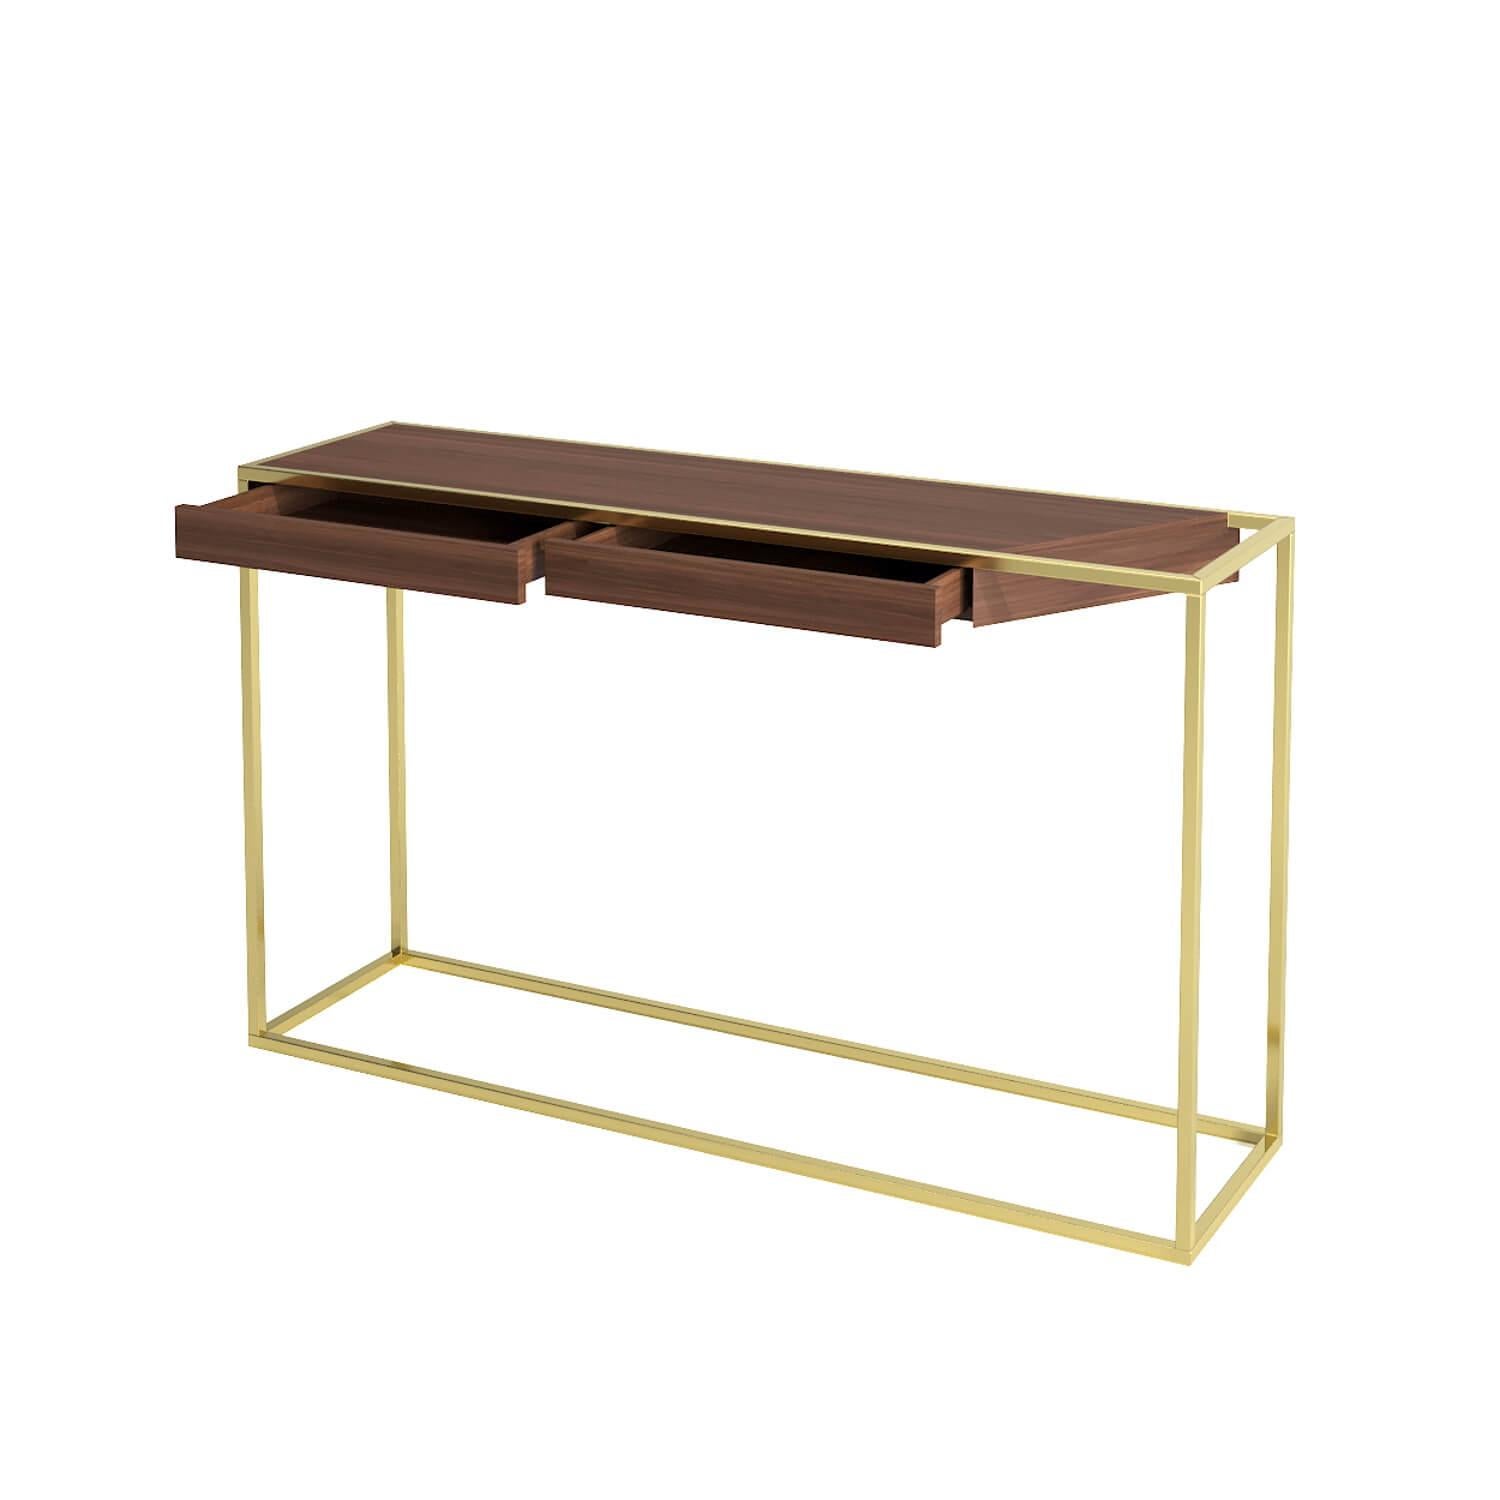 Modern Minimalist Rectangular Console Table Walnut Wood and Brushed Brass In New Condition For Sale In Vila Nova Famalicão, PT